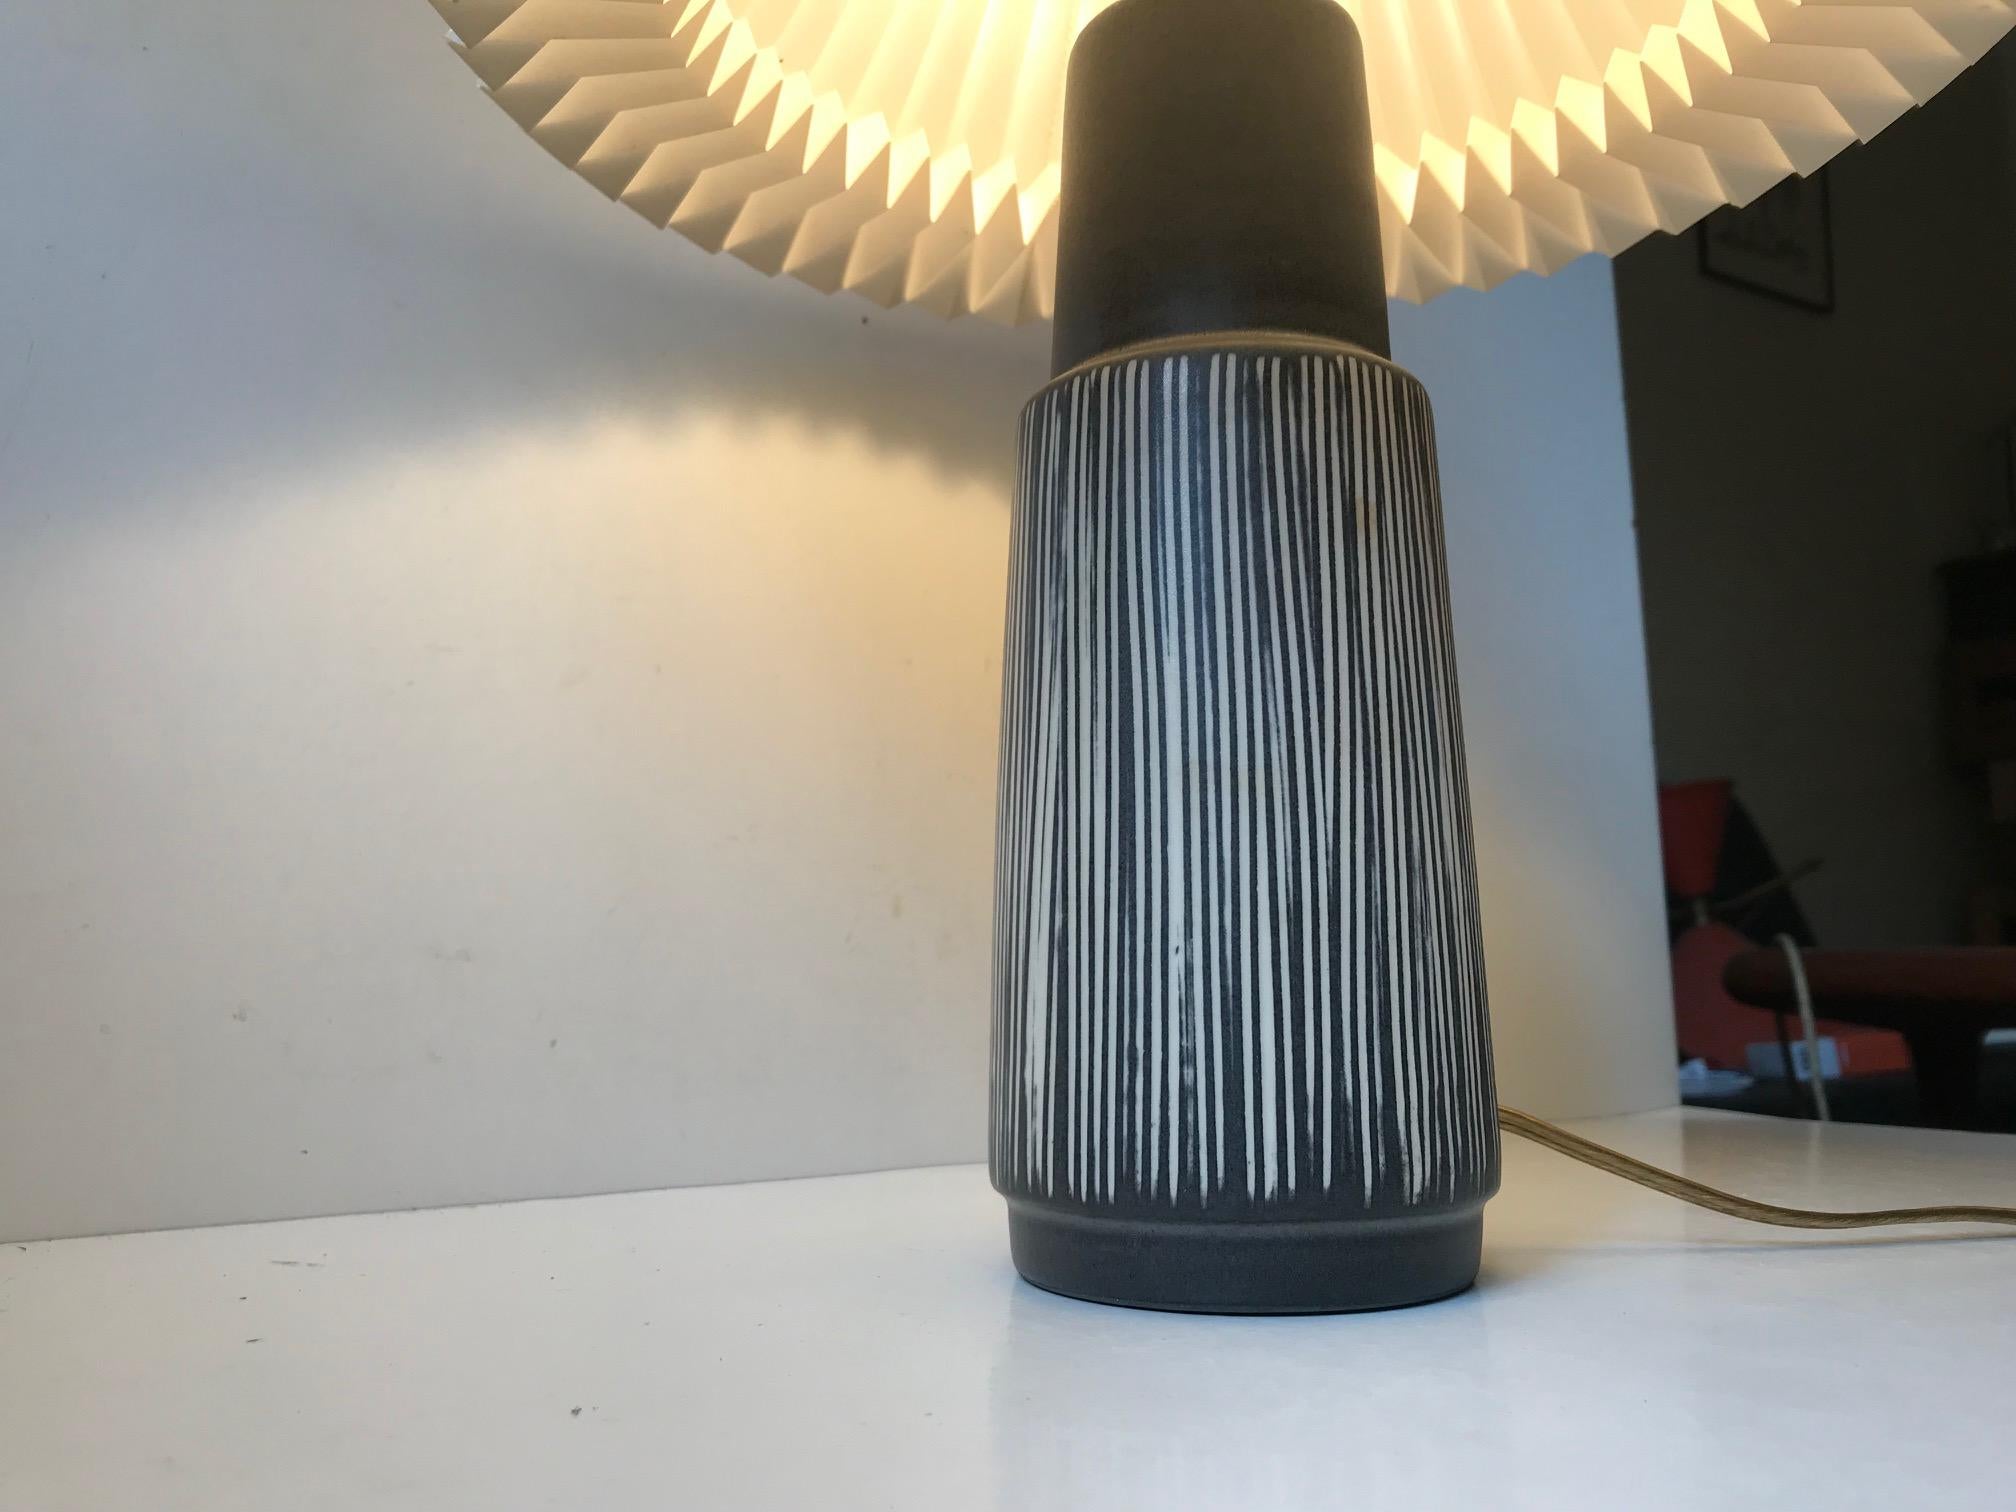 Pottery Danish Modern Ceramic Table Lamp with Stripes by Elisabeth Loholt, 1950s